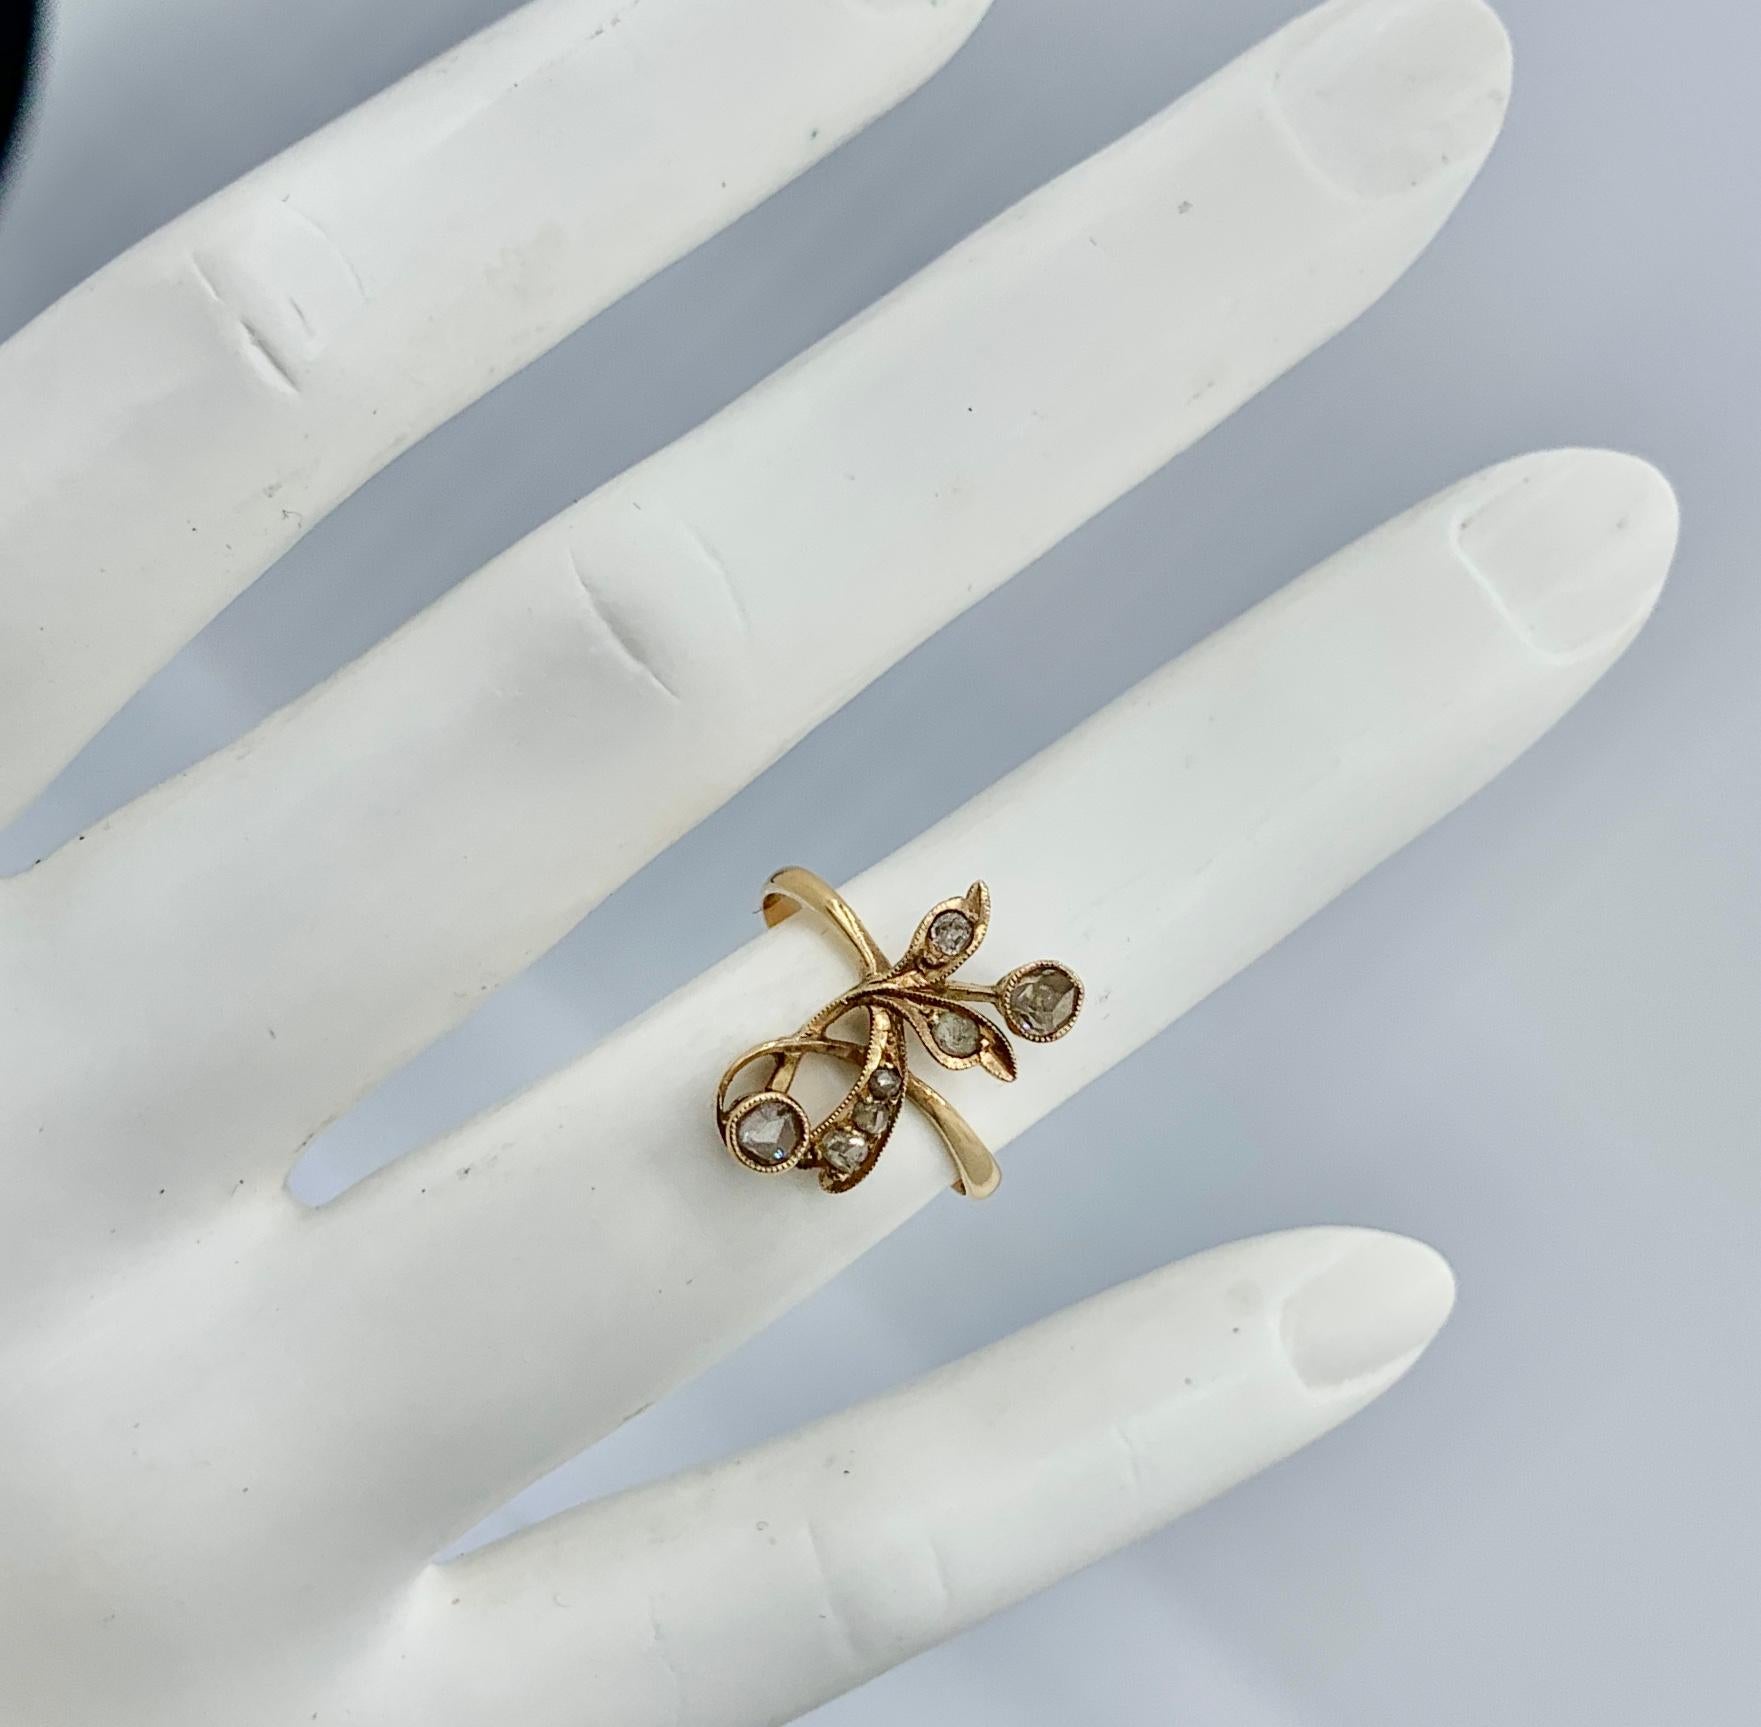 This is an extraordinary antique Art Nouveau, Belle Epoque Rose Cut Diamond Ring in a stunning and very rare Flower motif of great beauty in 18 Karat Gold.   The Rose Cut Diamonds are set in a stunning delicate romantic flower design in 18 Karat